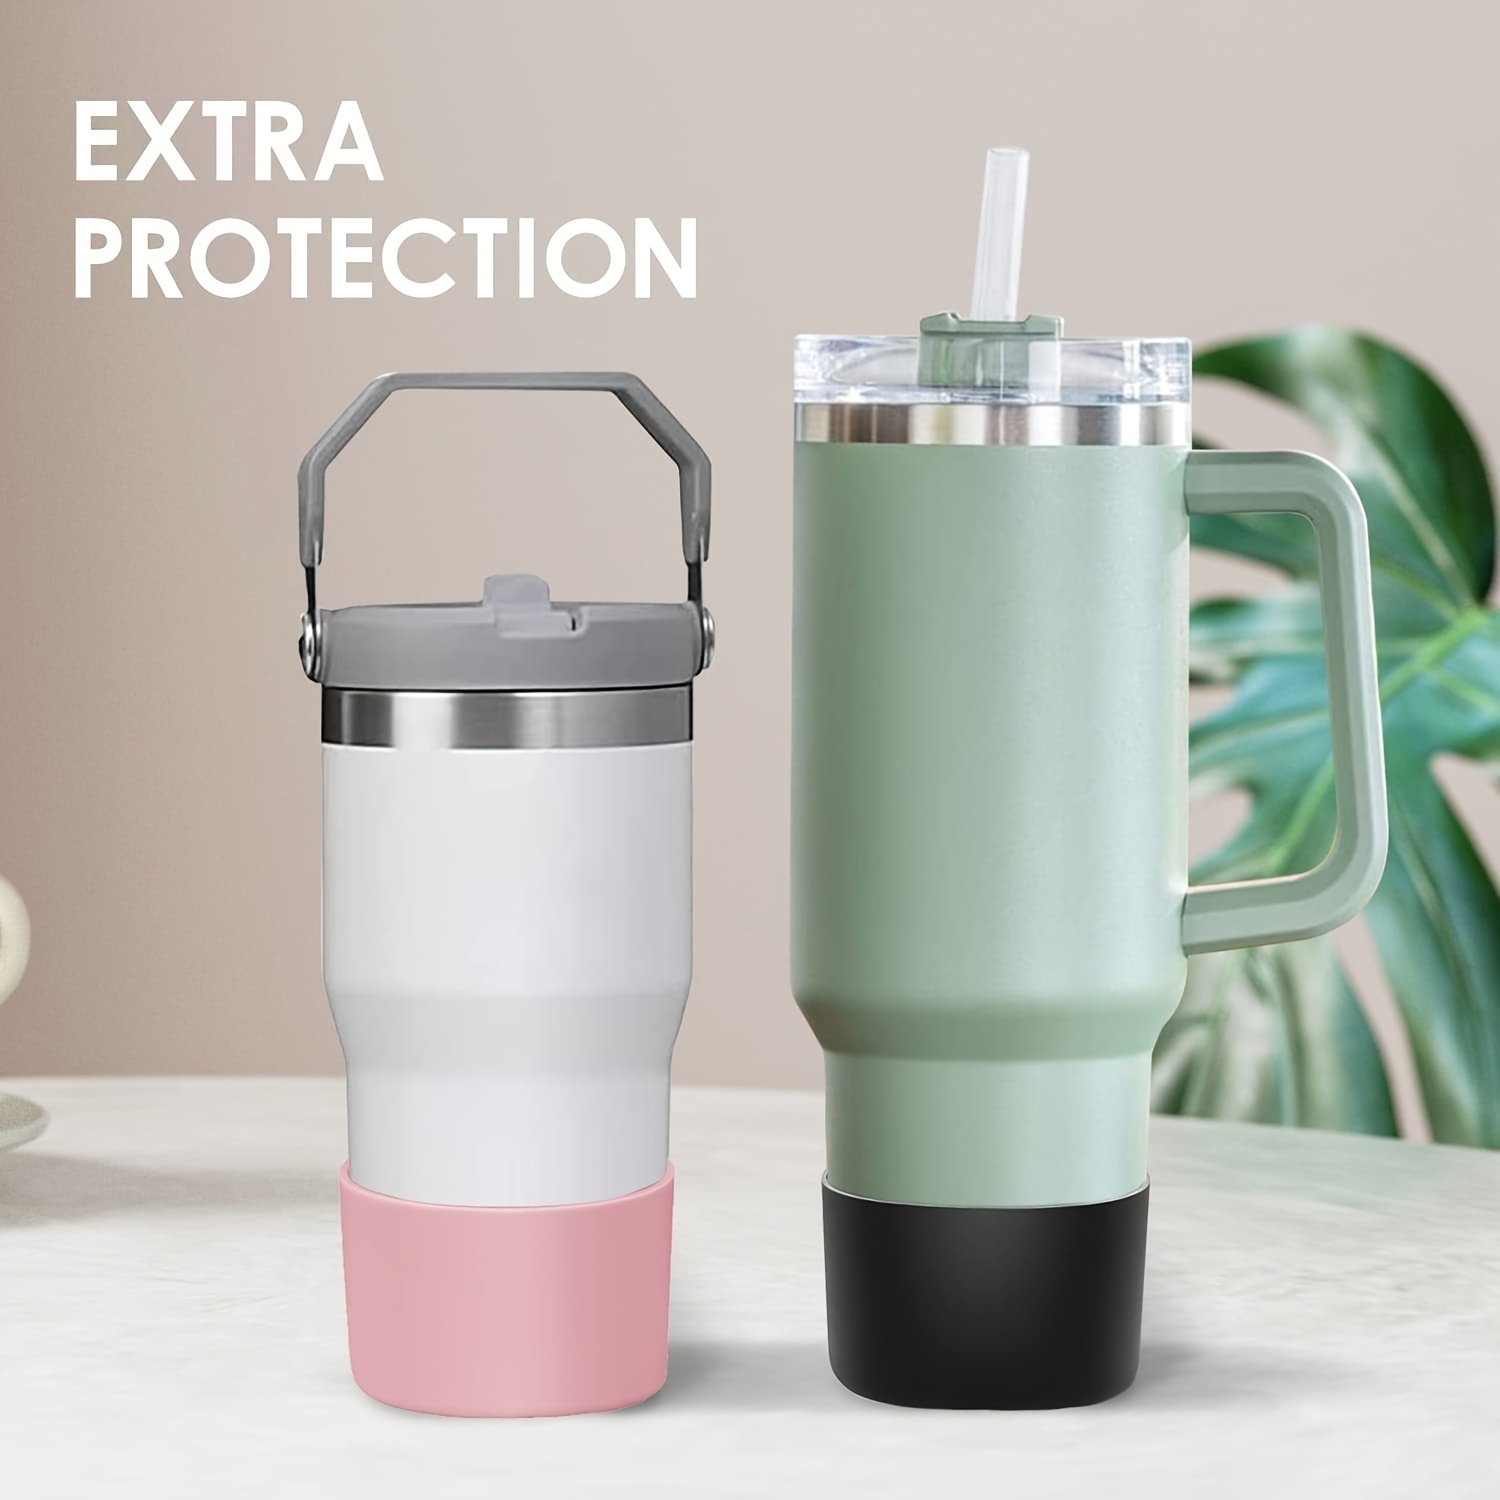 Silicone Boot Sleeve For Stanley Quencher Tumbler With Handle, For Iceflow,  Protective Water Bottle Cup Bottom Cover For Stanley Tumbler Accessories -  Temu Austria